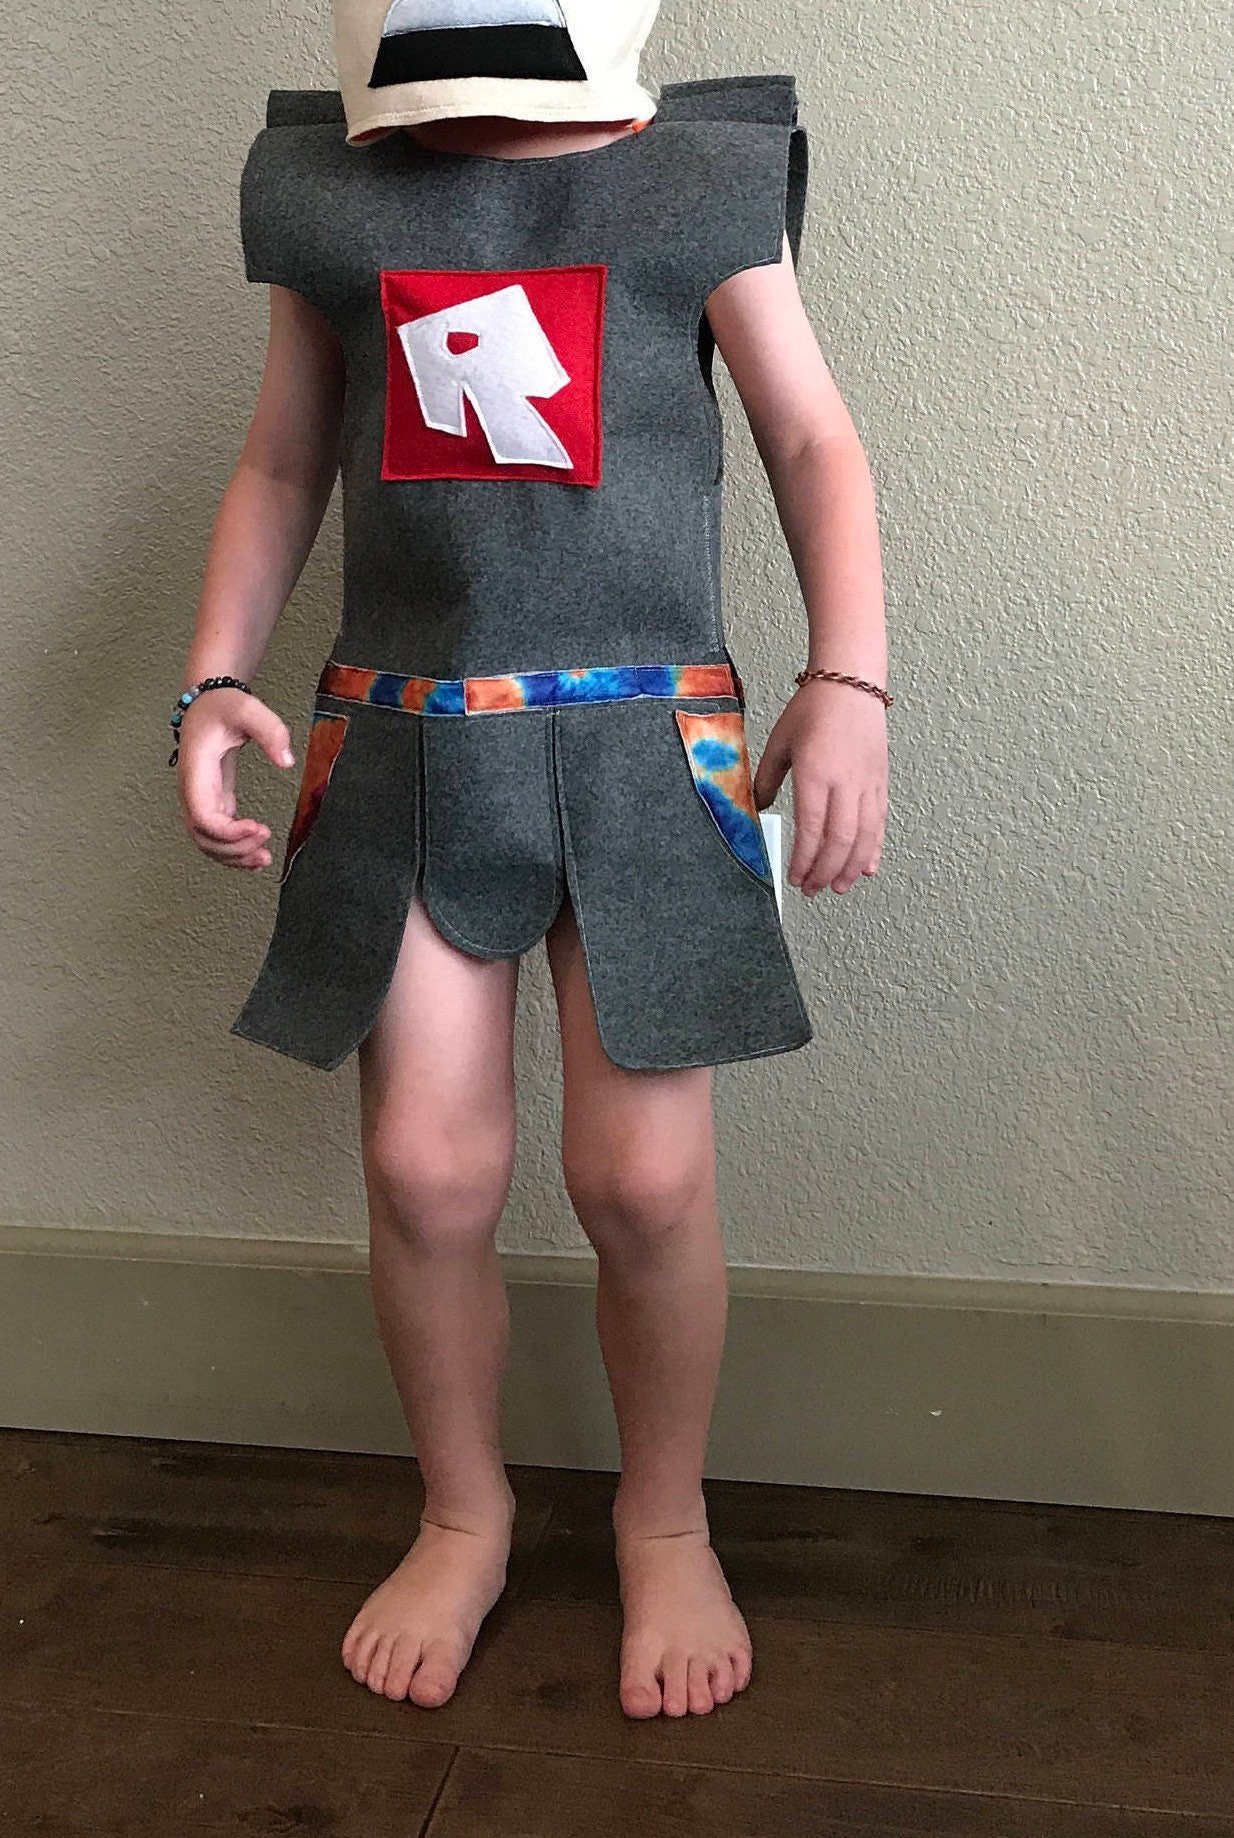 Roblox BODY costume for kids ages 4 CUSTOM made to order -  Portugal